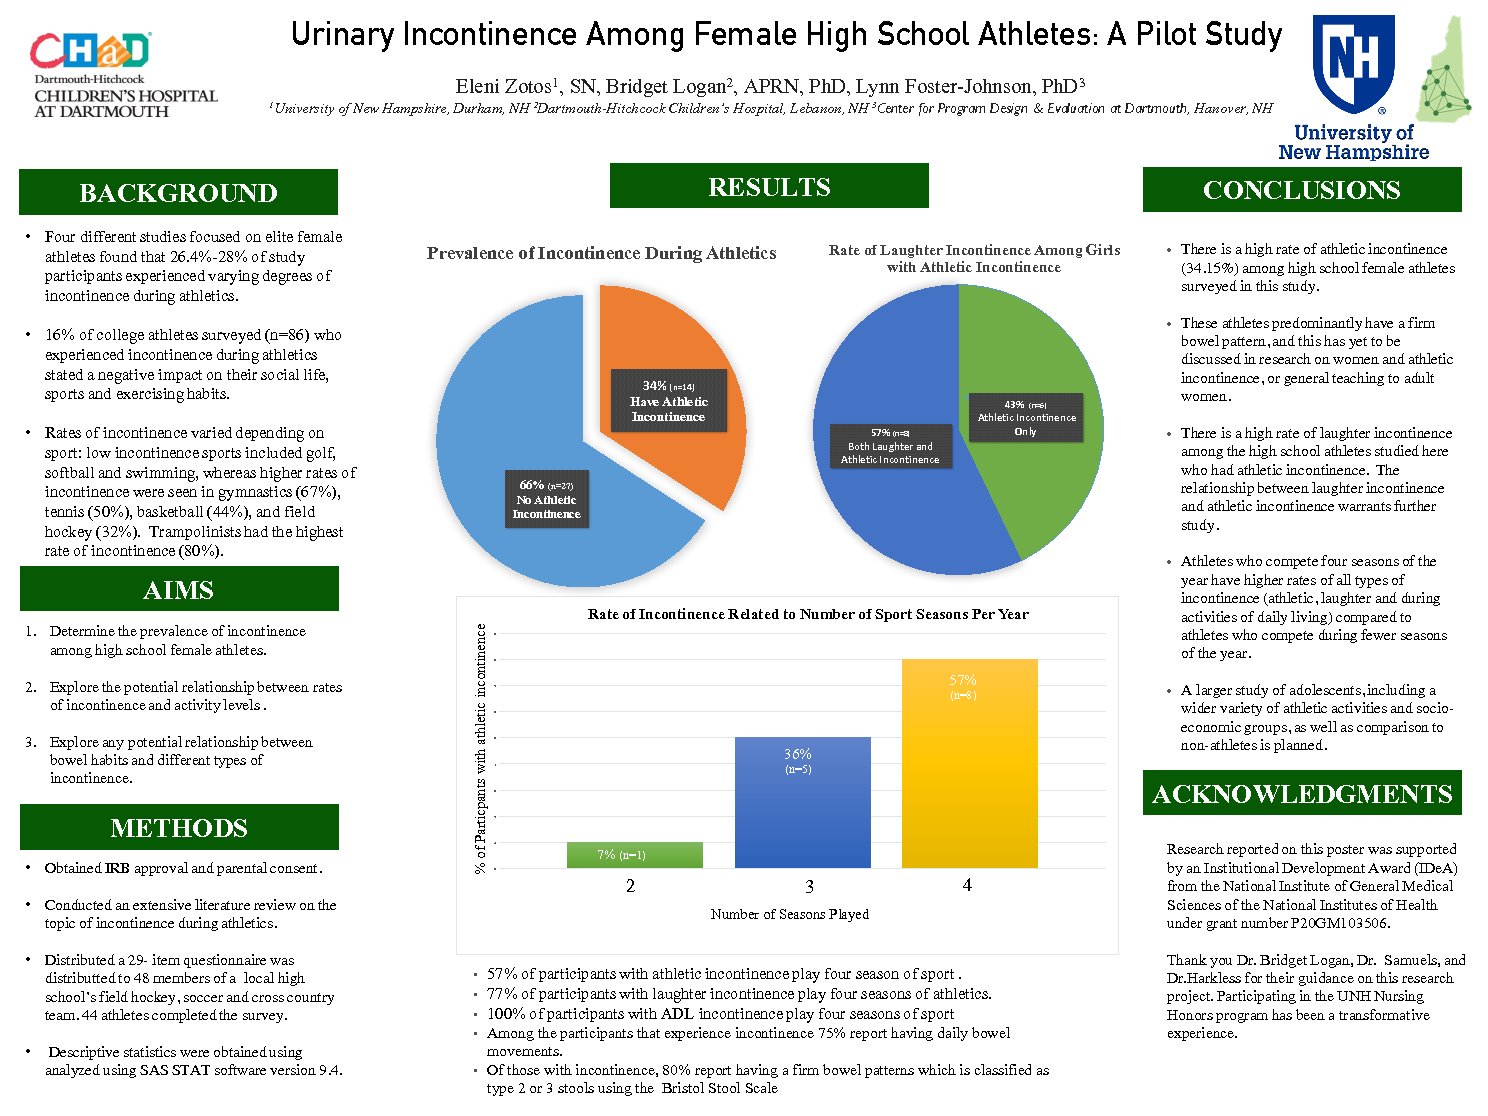 Urinary Incontinence Among Female High School Athletes: A Pilot Study by eac95